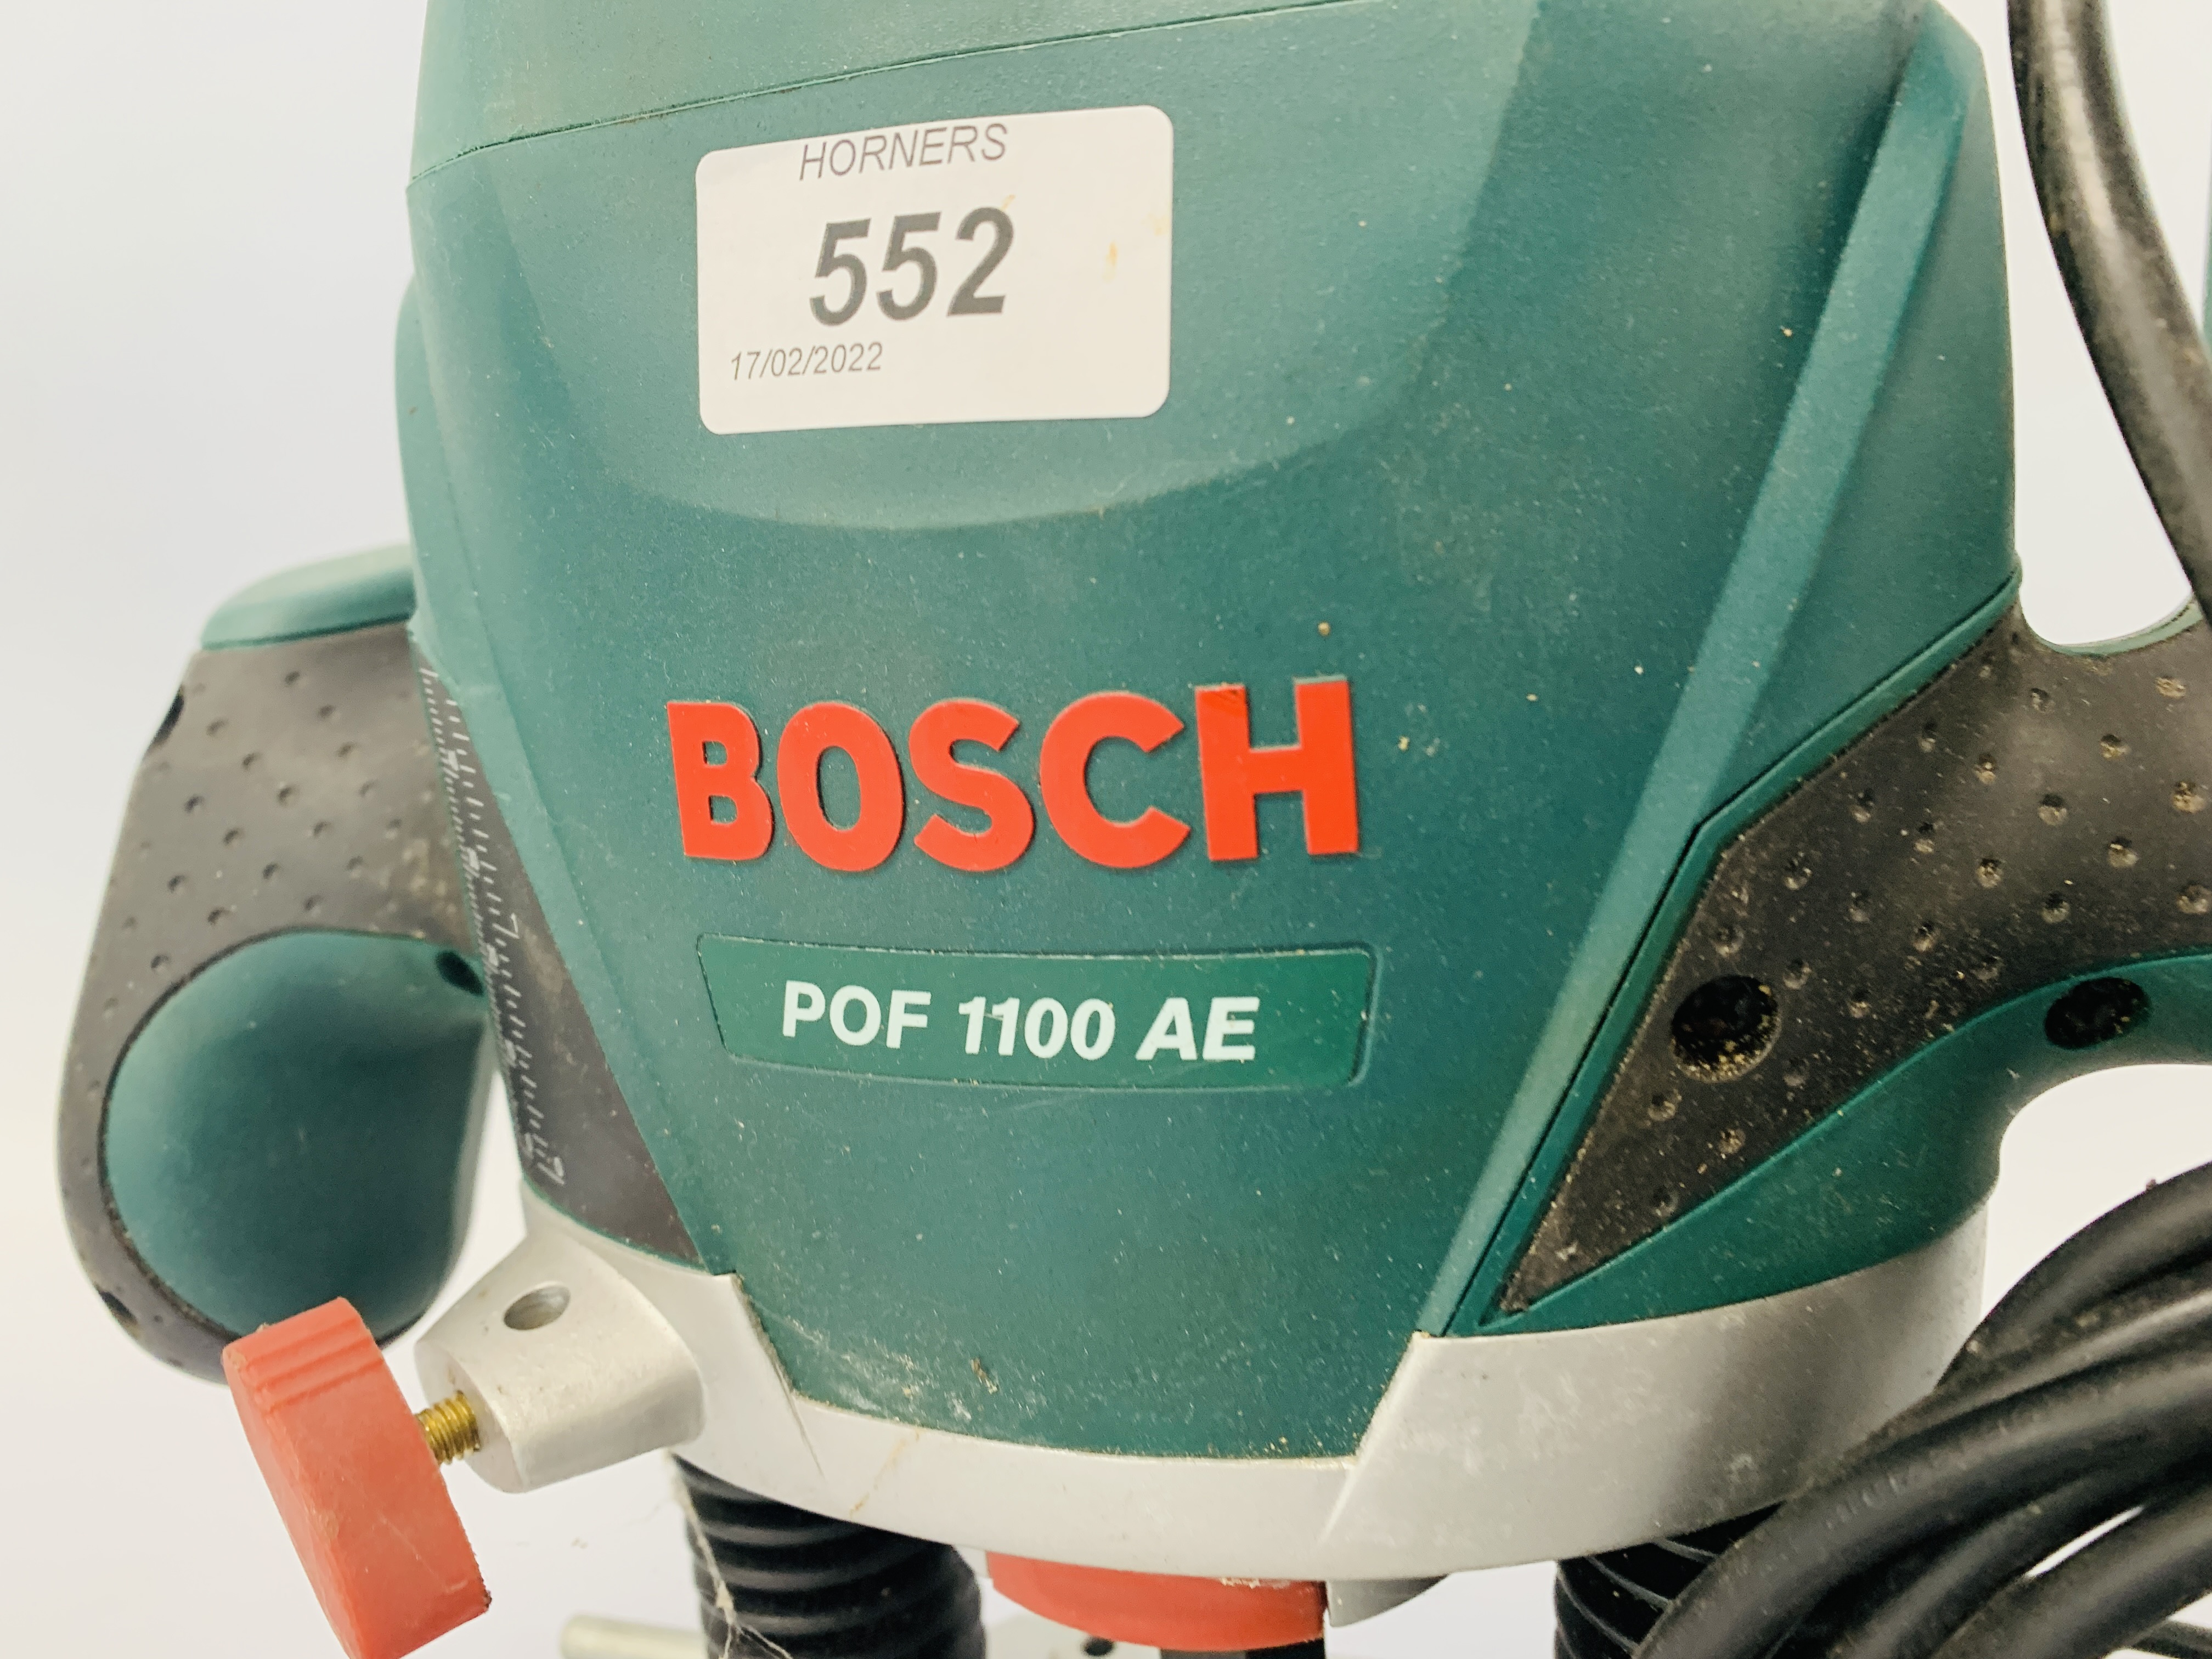 A BOSCH PLUNGE ROUTER MODEL POF 1100 AE AND A BOSCH 18 VOLT CORDLESS DRILL AND CHARGER MODEL PSR18 - Image 5 of 6